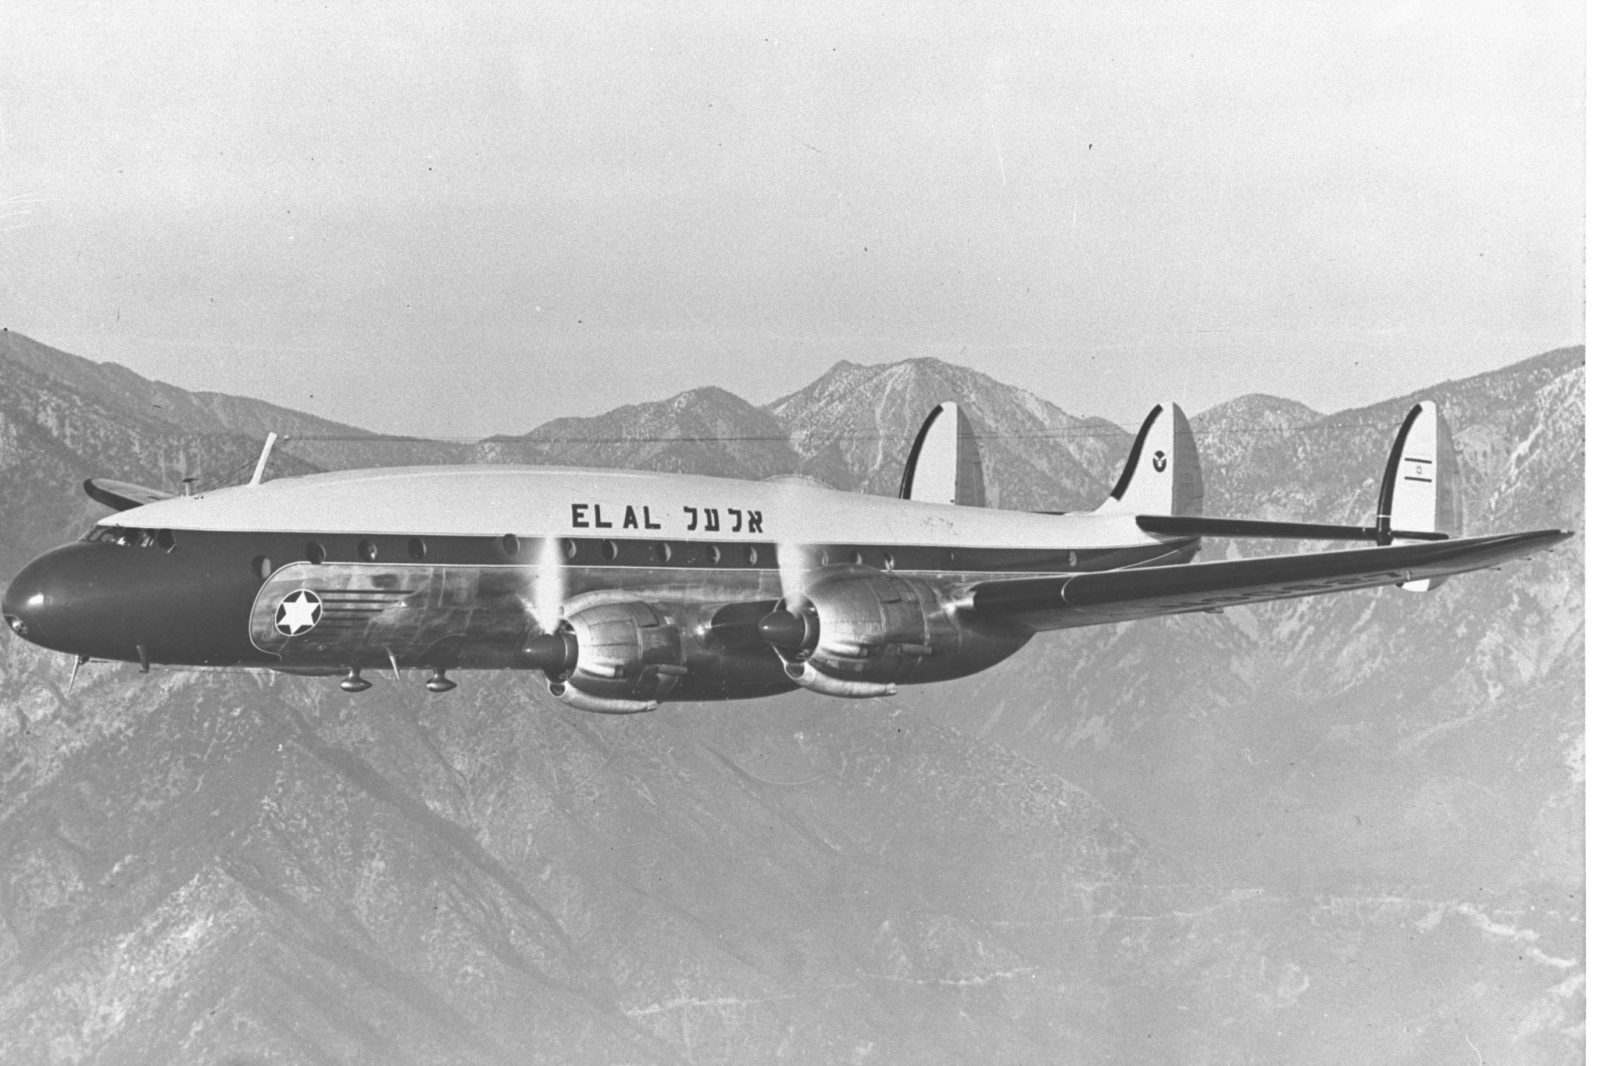 An El Al Lockheed Constellation plane, 1951. Photo courtesy of the National Photo Collection of Israel